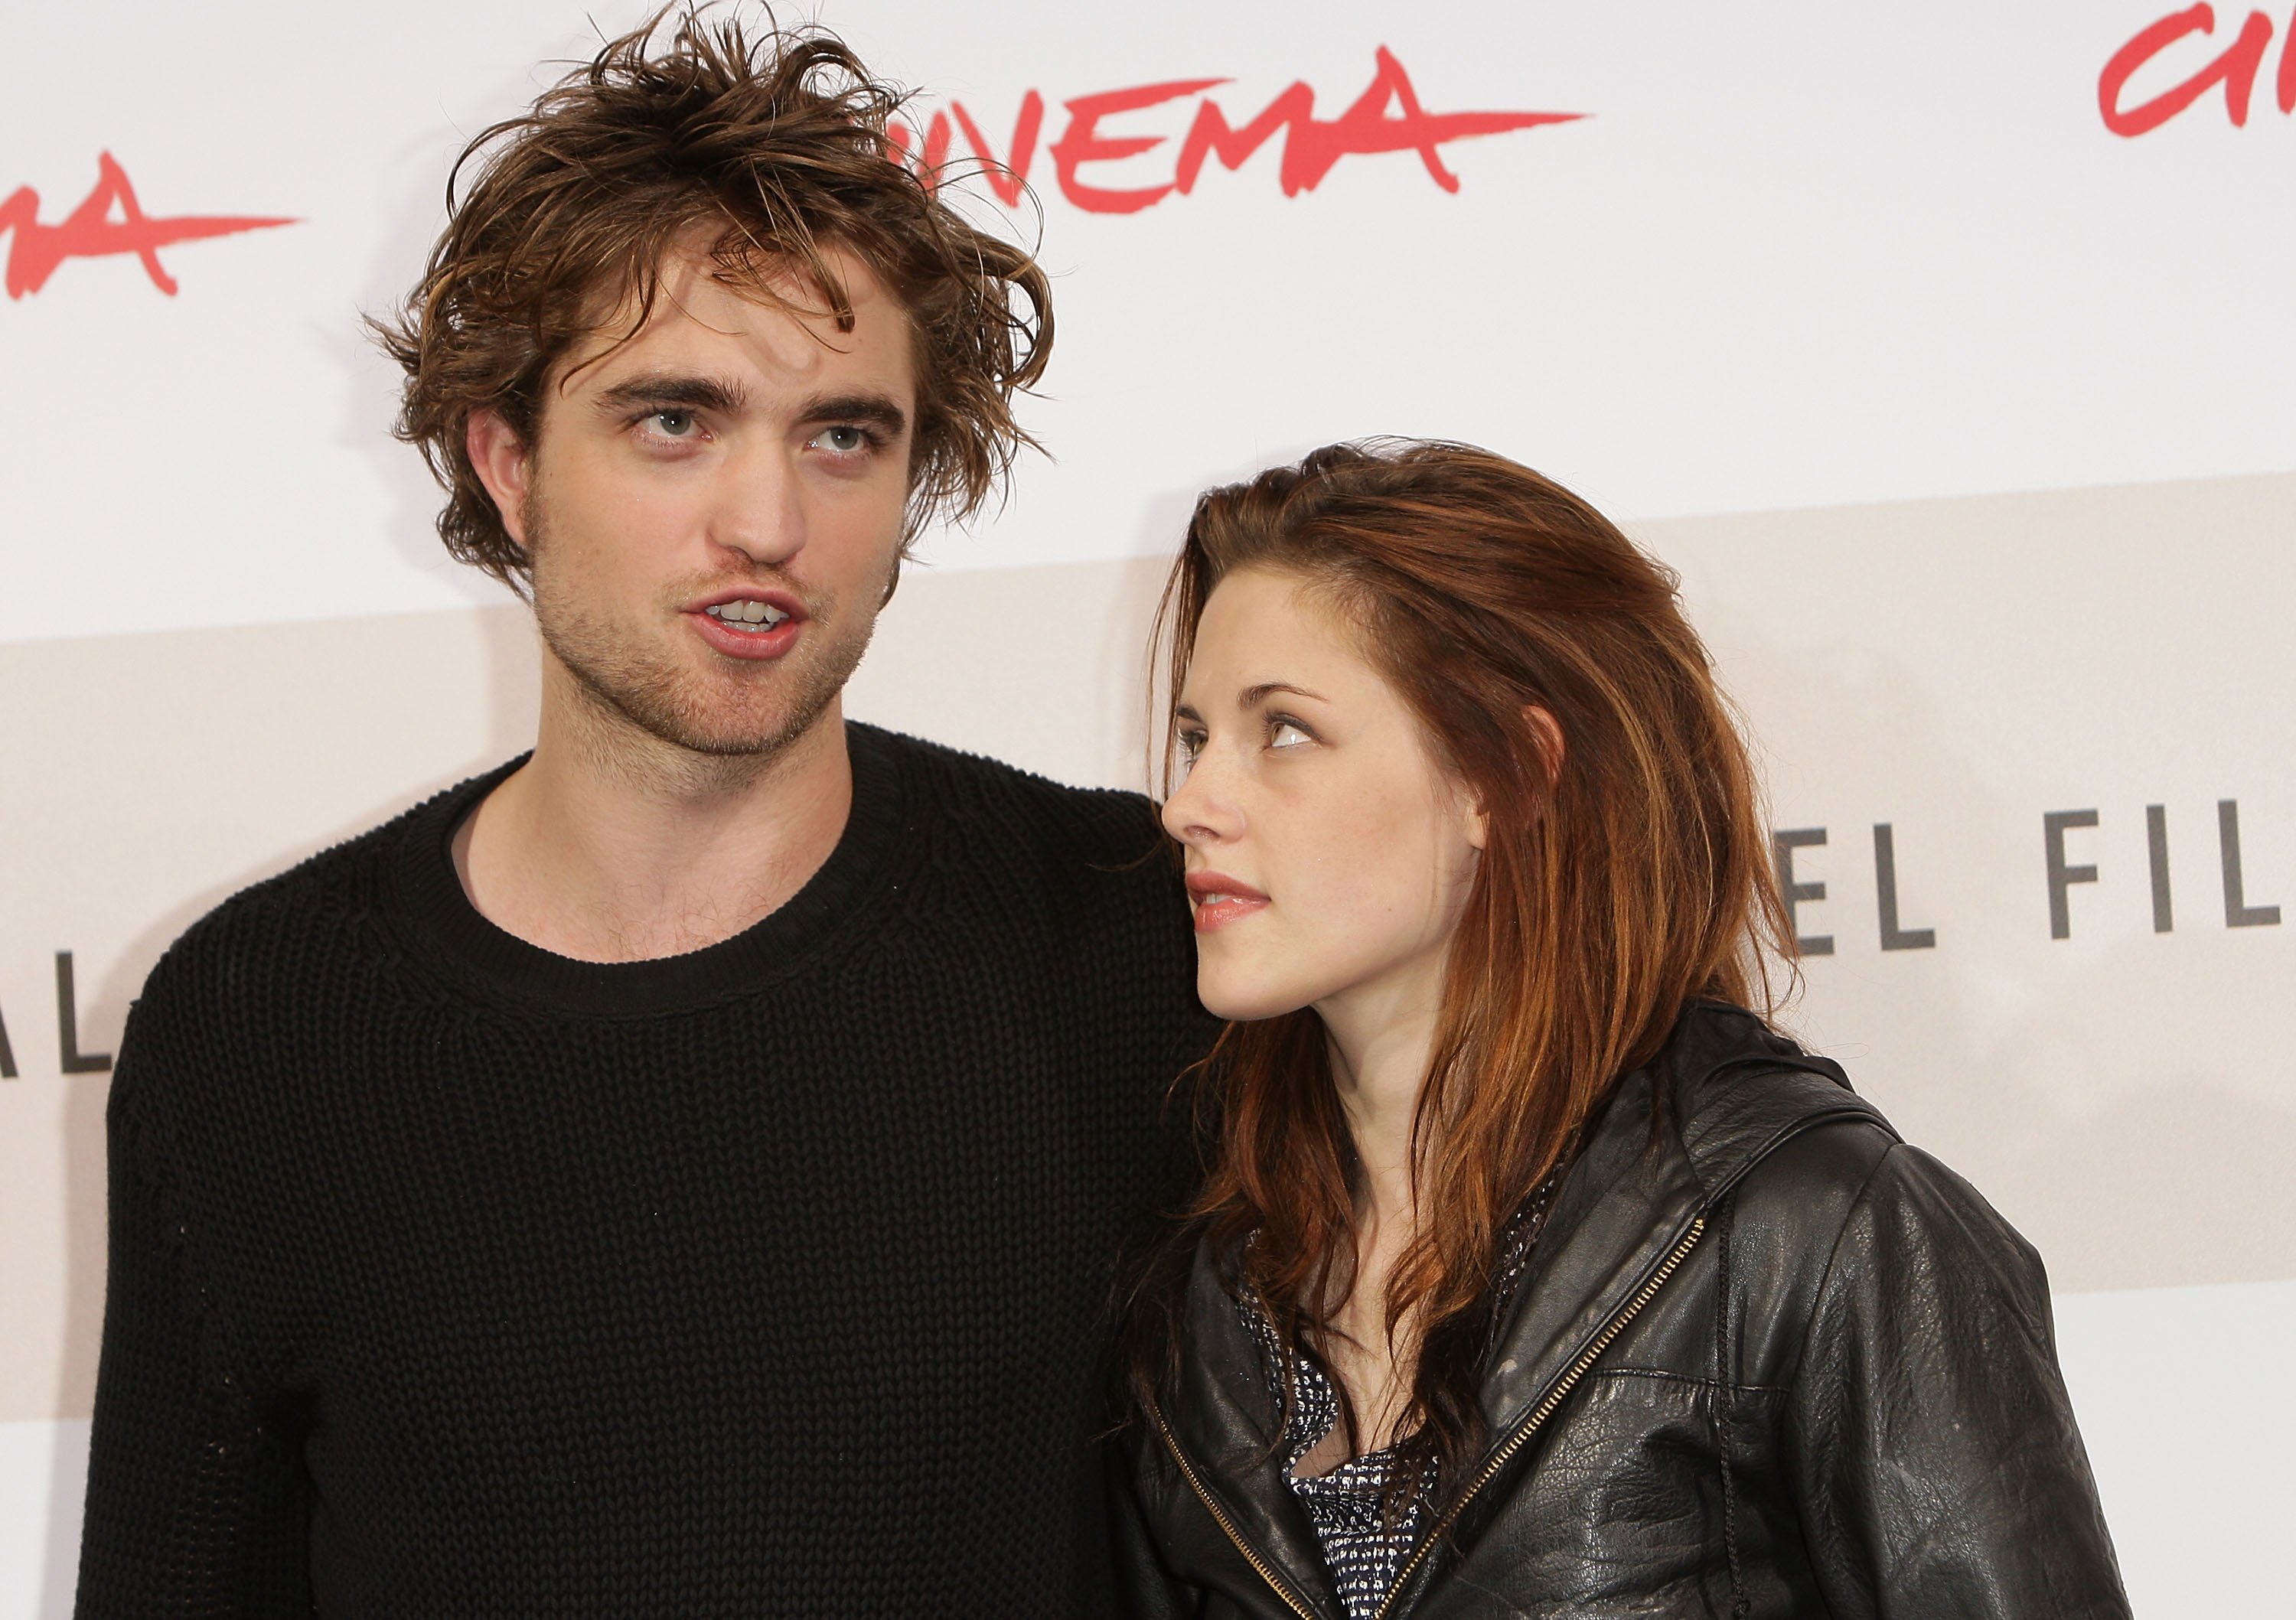 Actor Robert Pattinson and Kristen Stewart attends the 'Twilight' photocall during the 3rd Rome International Film Festival held at the Auditorium Parco della Musica on October 30, 2008 in Rome, Italy. | Source: Getty Images